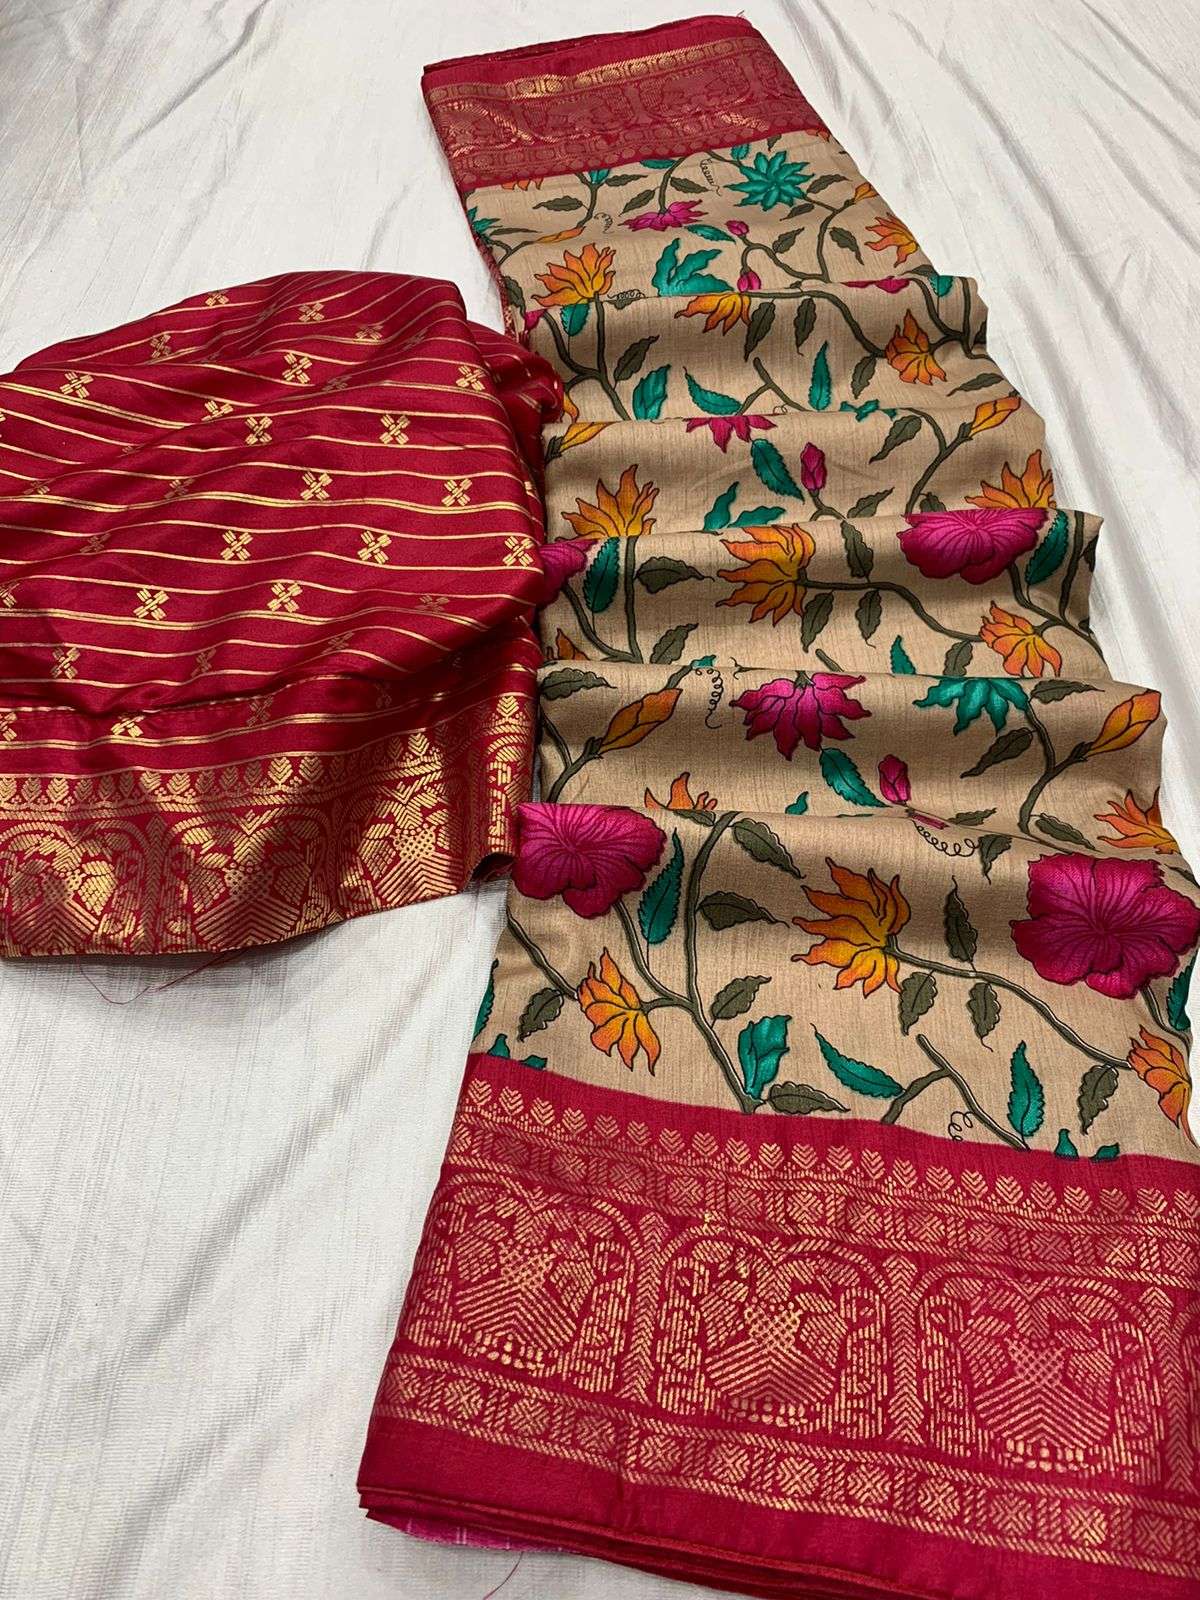 FESTIVE DOLA NEW LAUNCH DOLA SILK SAREES AT AWESOME RATES AN...